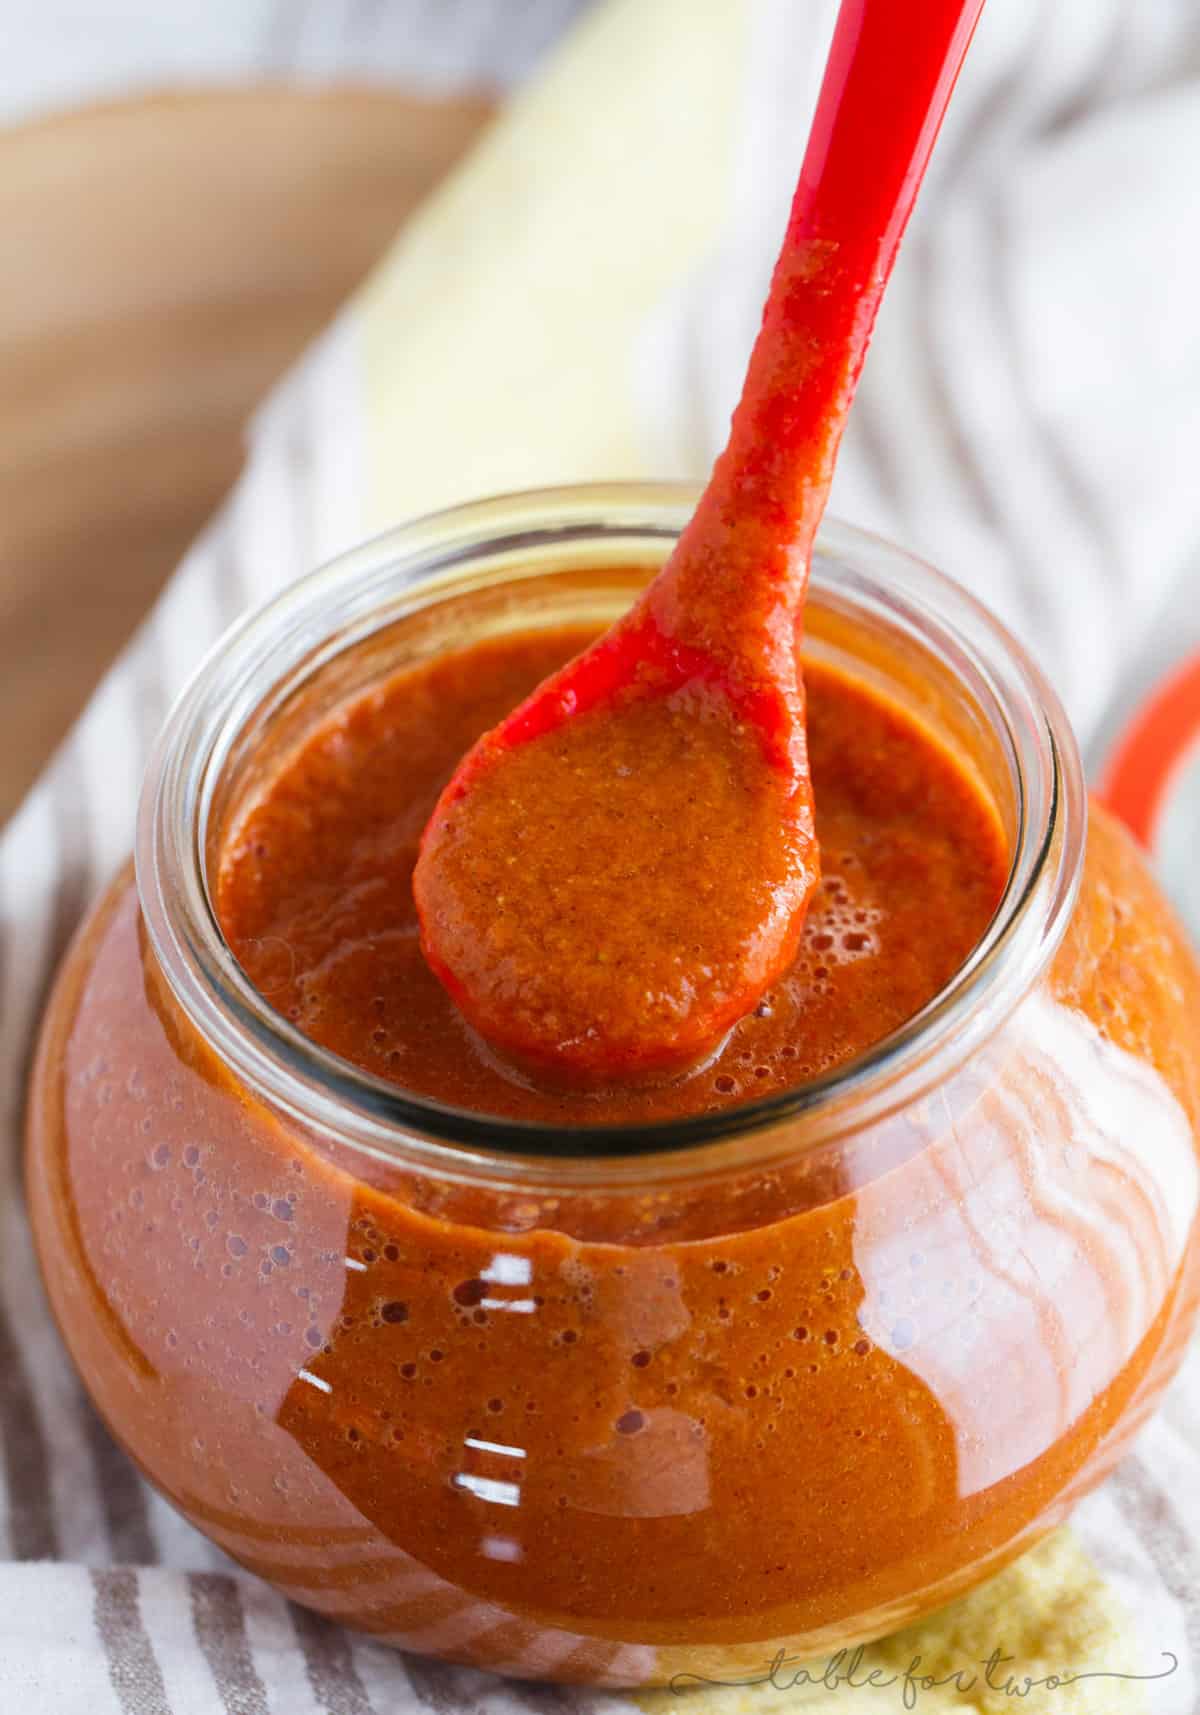 gallery Pebble philosopher Easy Homemade Blender Enchilada Sauce - Table for Two® by Julie Chiou